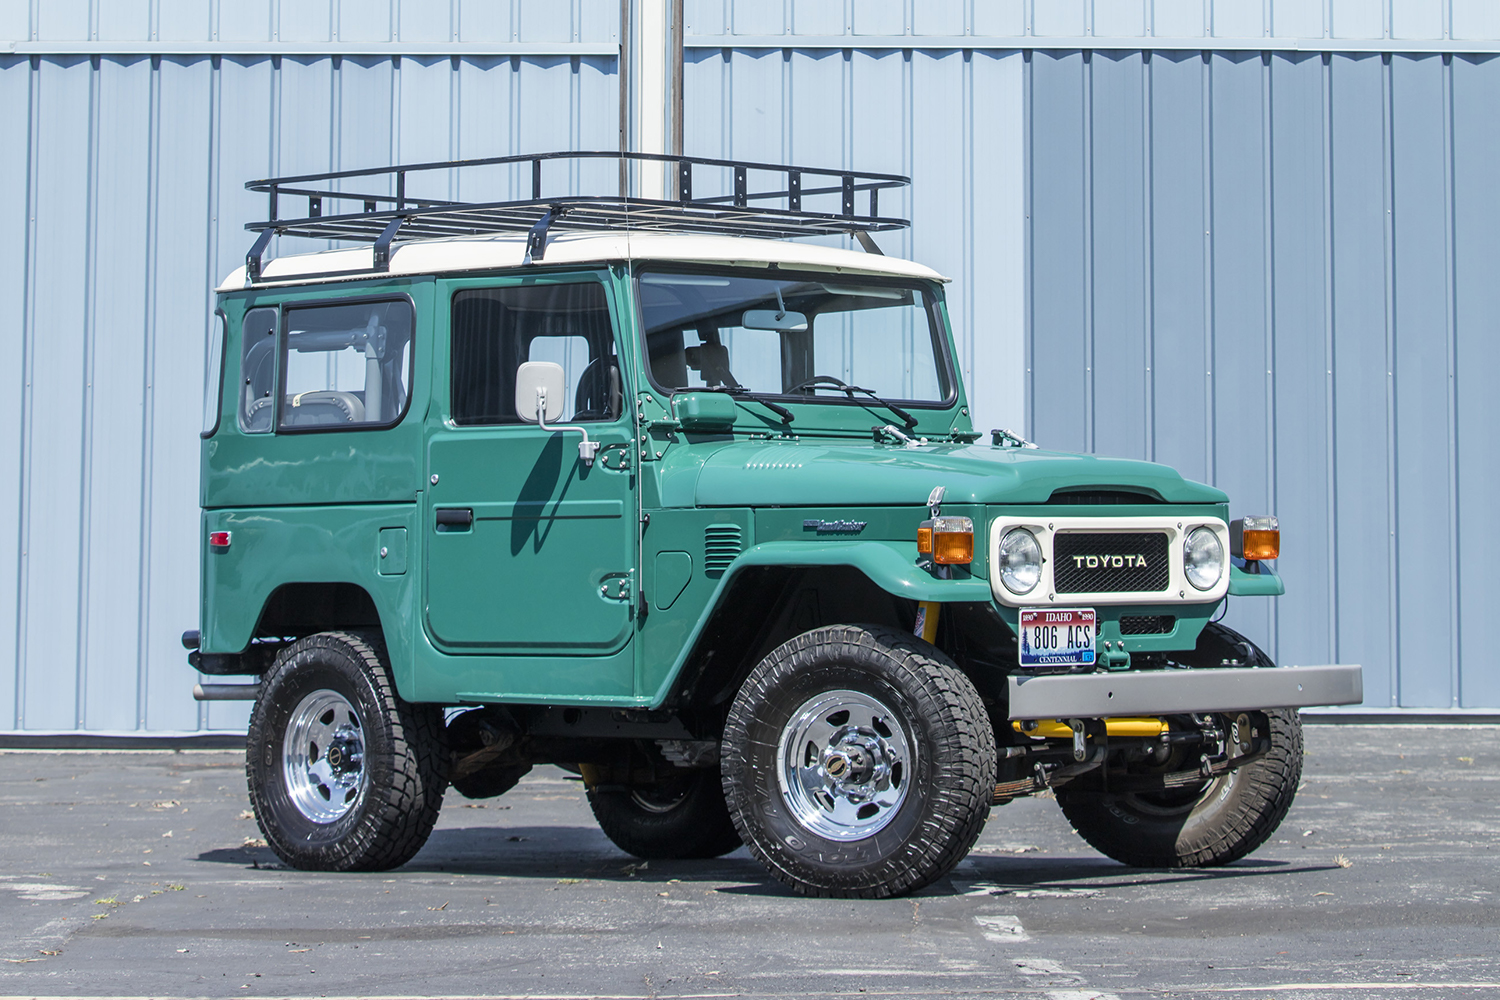 The 1980 Toyota FJ40 Land Cruiser owned by Tom Hanks. It will sell this August at the Bonhams Quail Lodge Auction at Monterey Car Week.